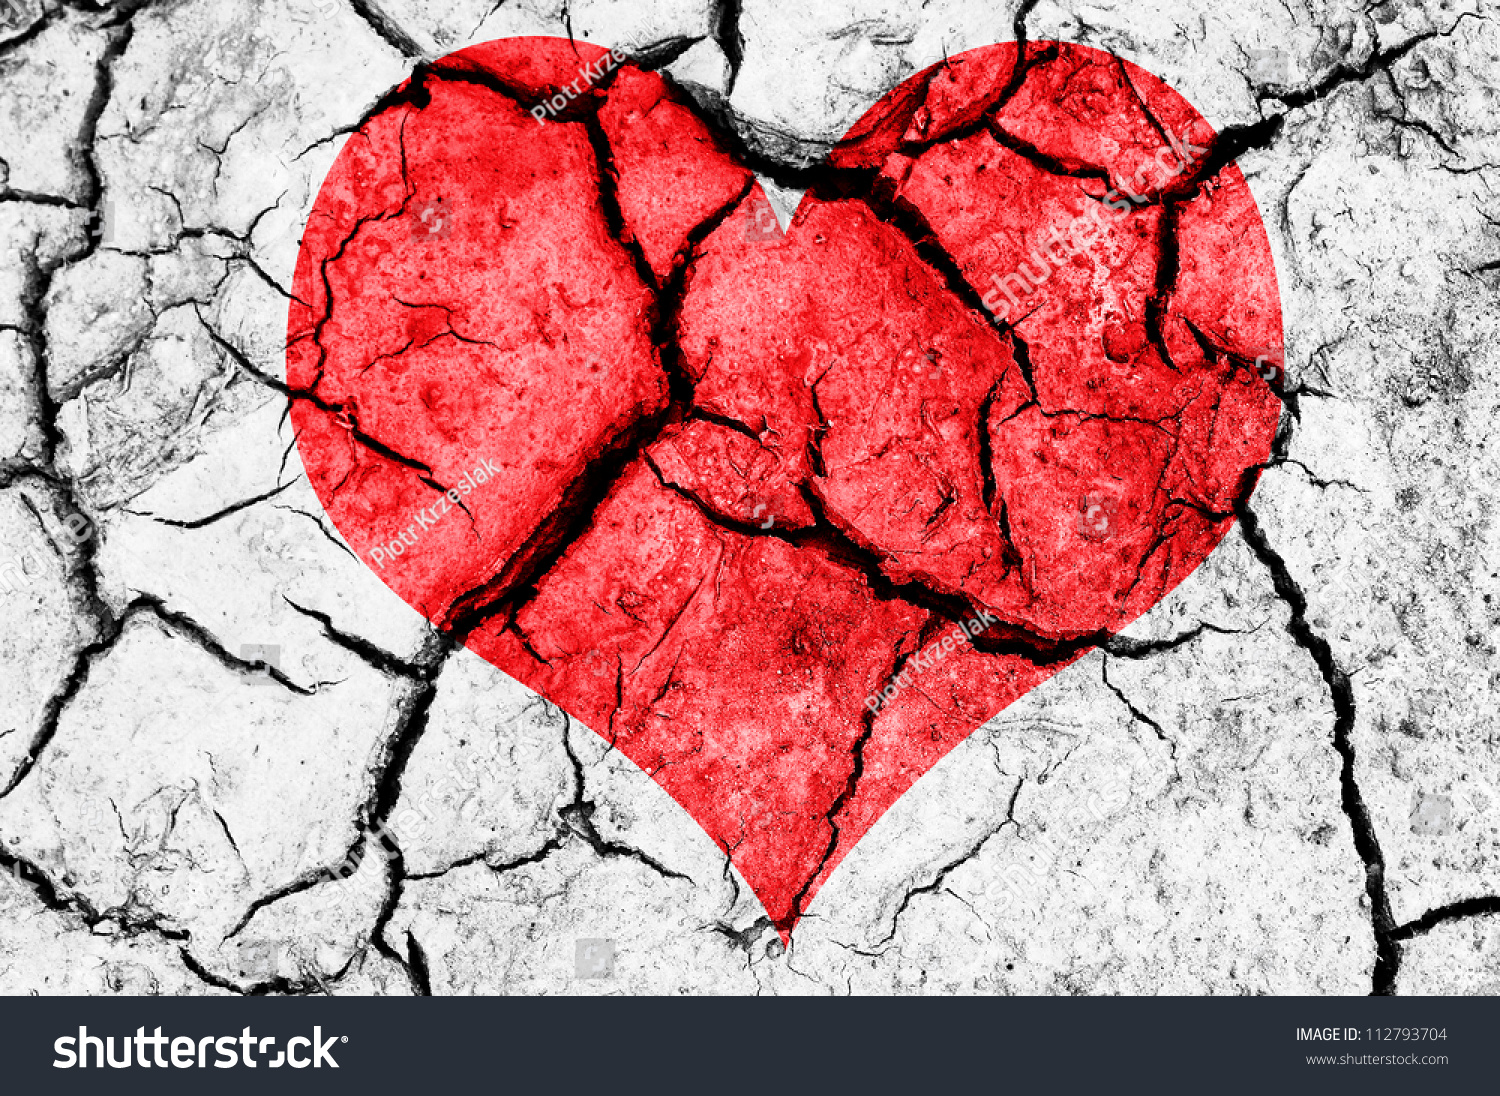 natural red heart shape in cracked dry soil #112793704